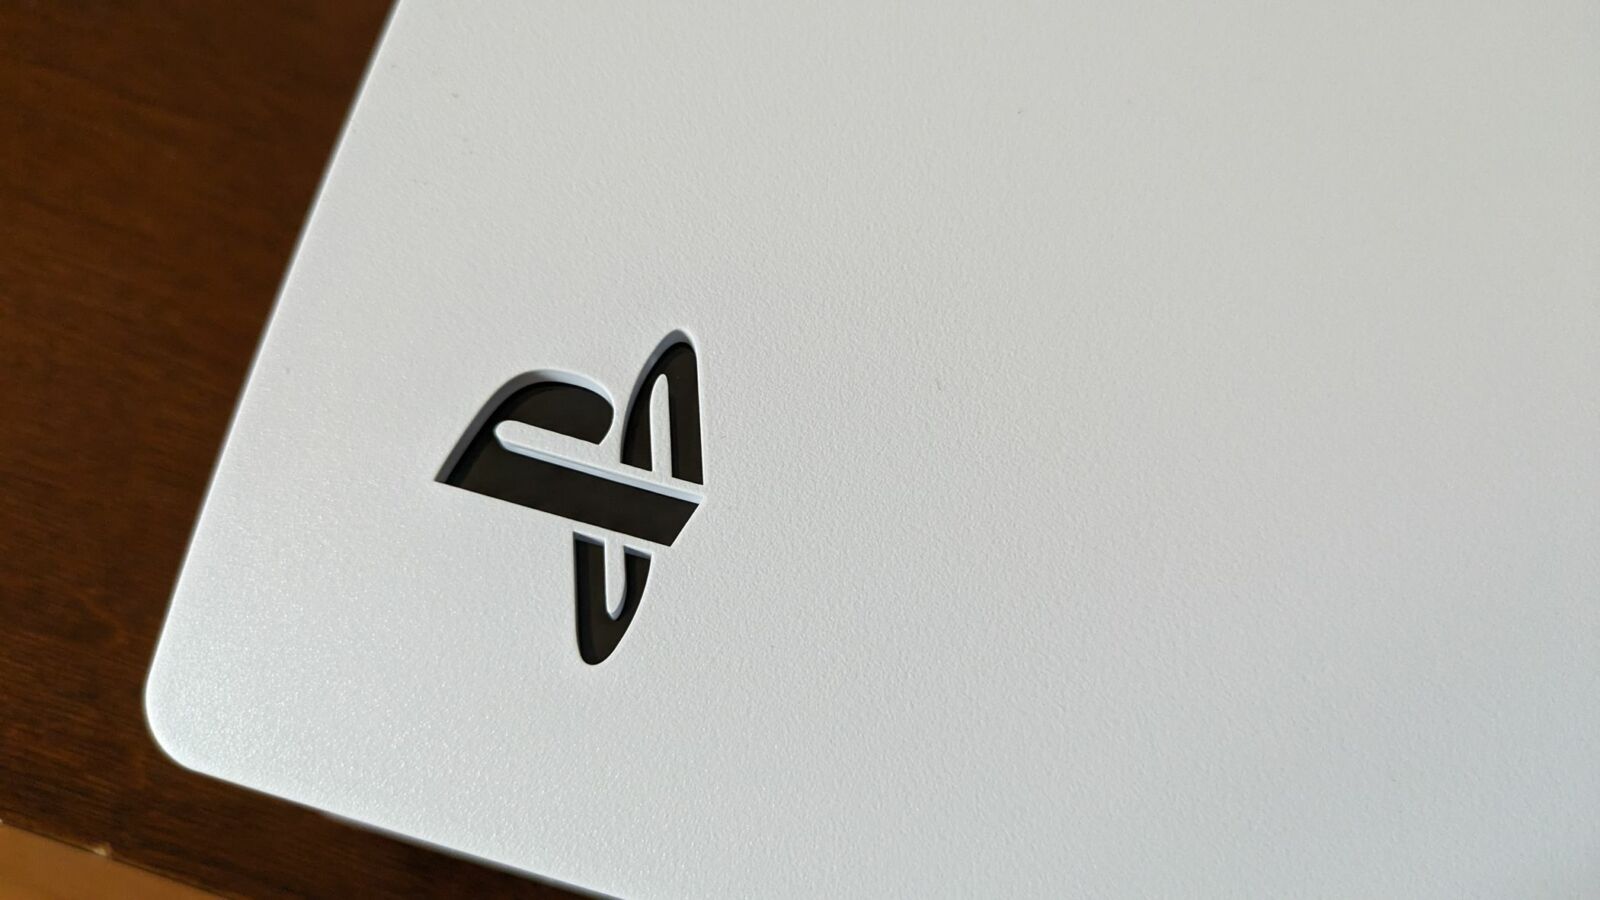 The PS5 logo on a PlayStation 5's chassis.